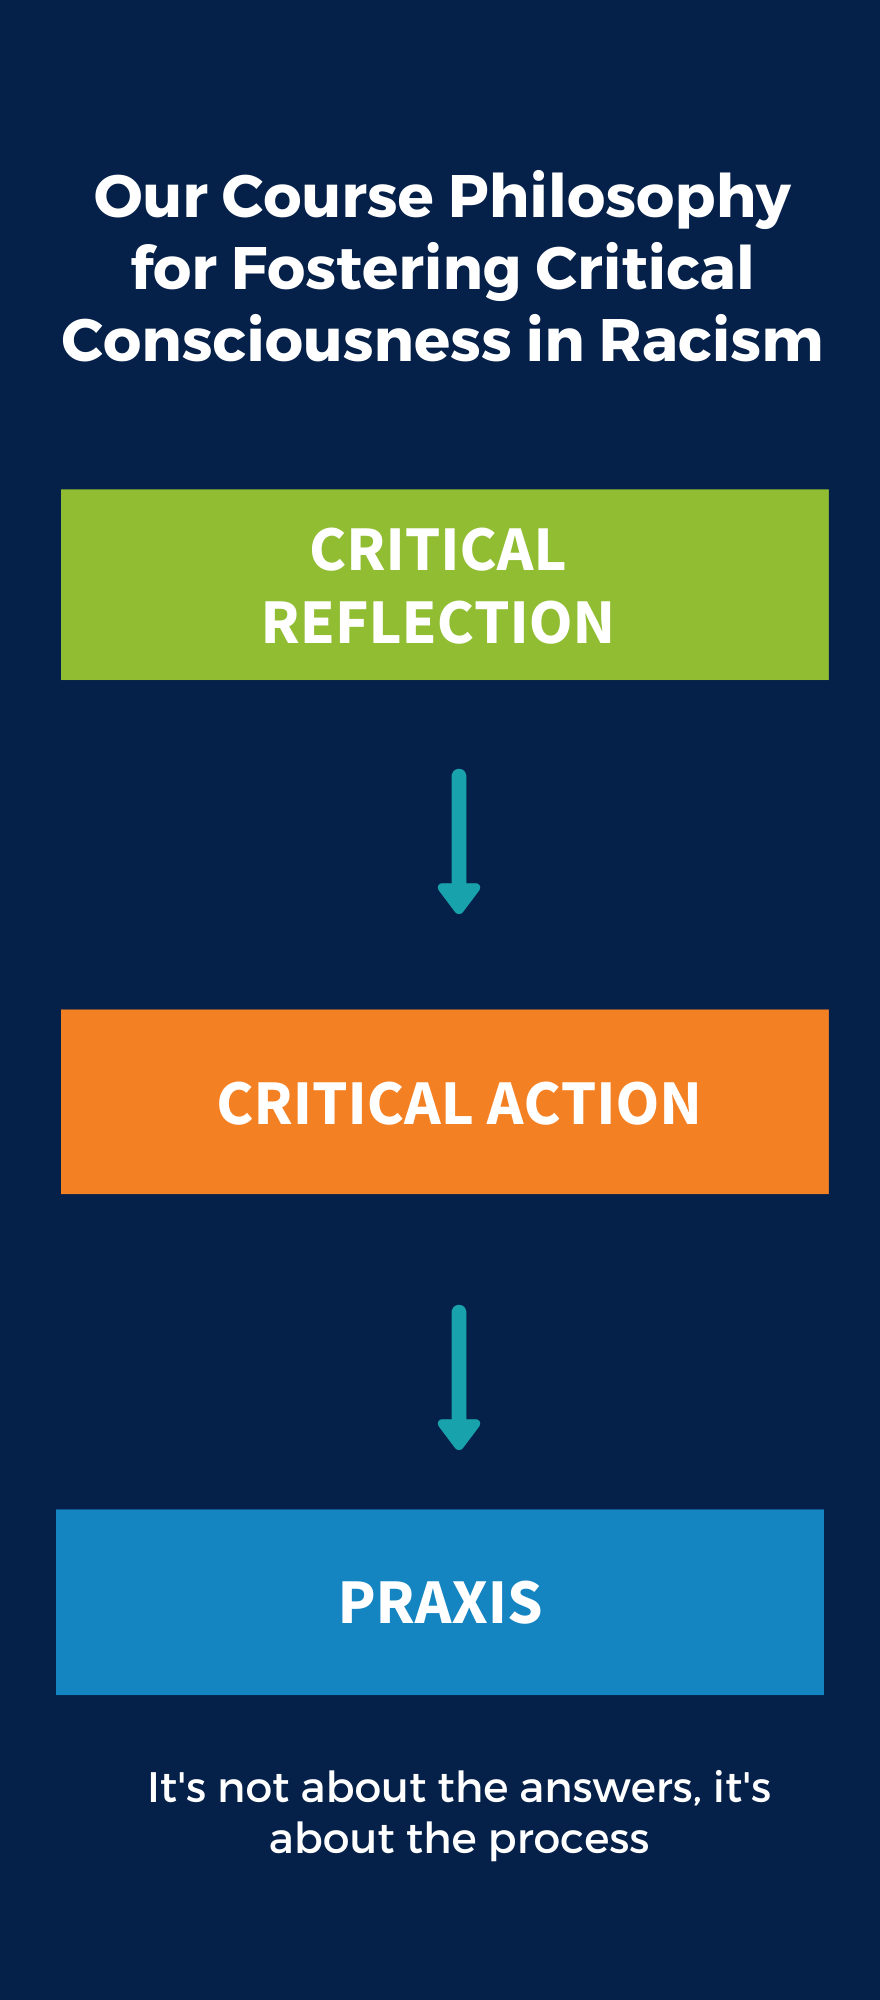 "Reflection + Action = Praxis" our course philosophy is it's not about the answers but the process